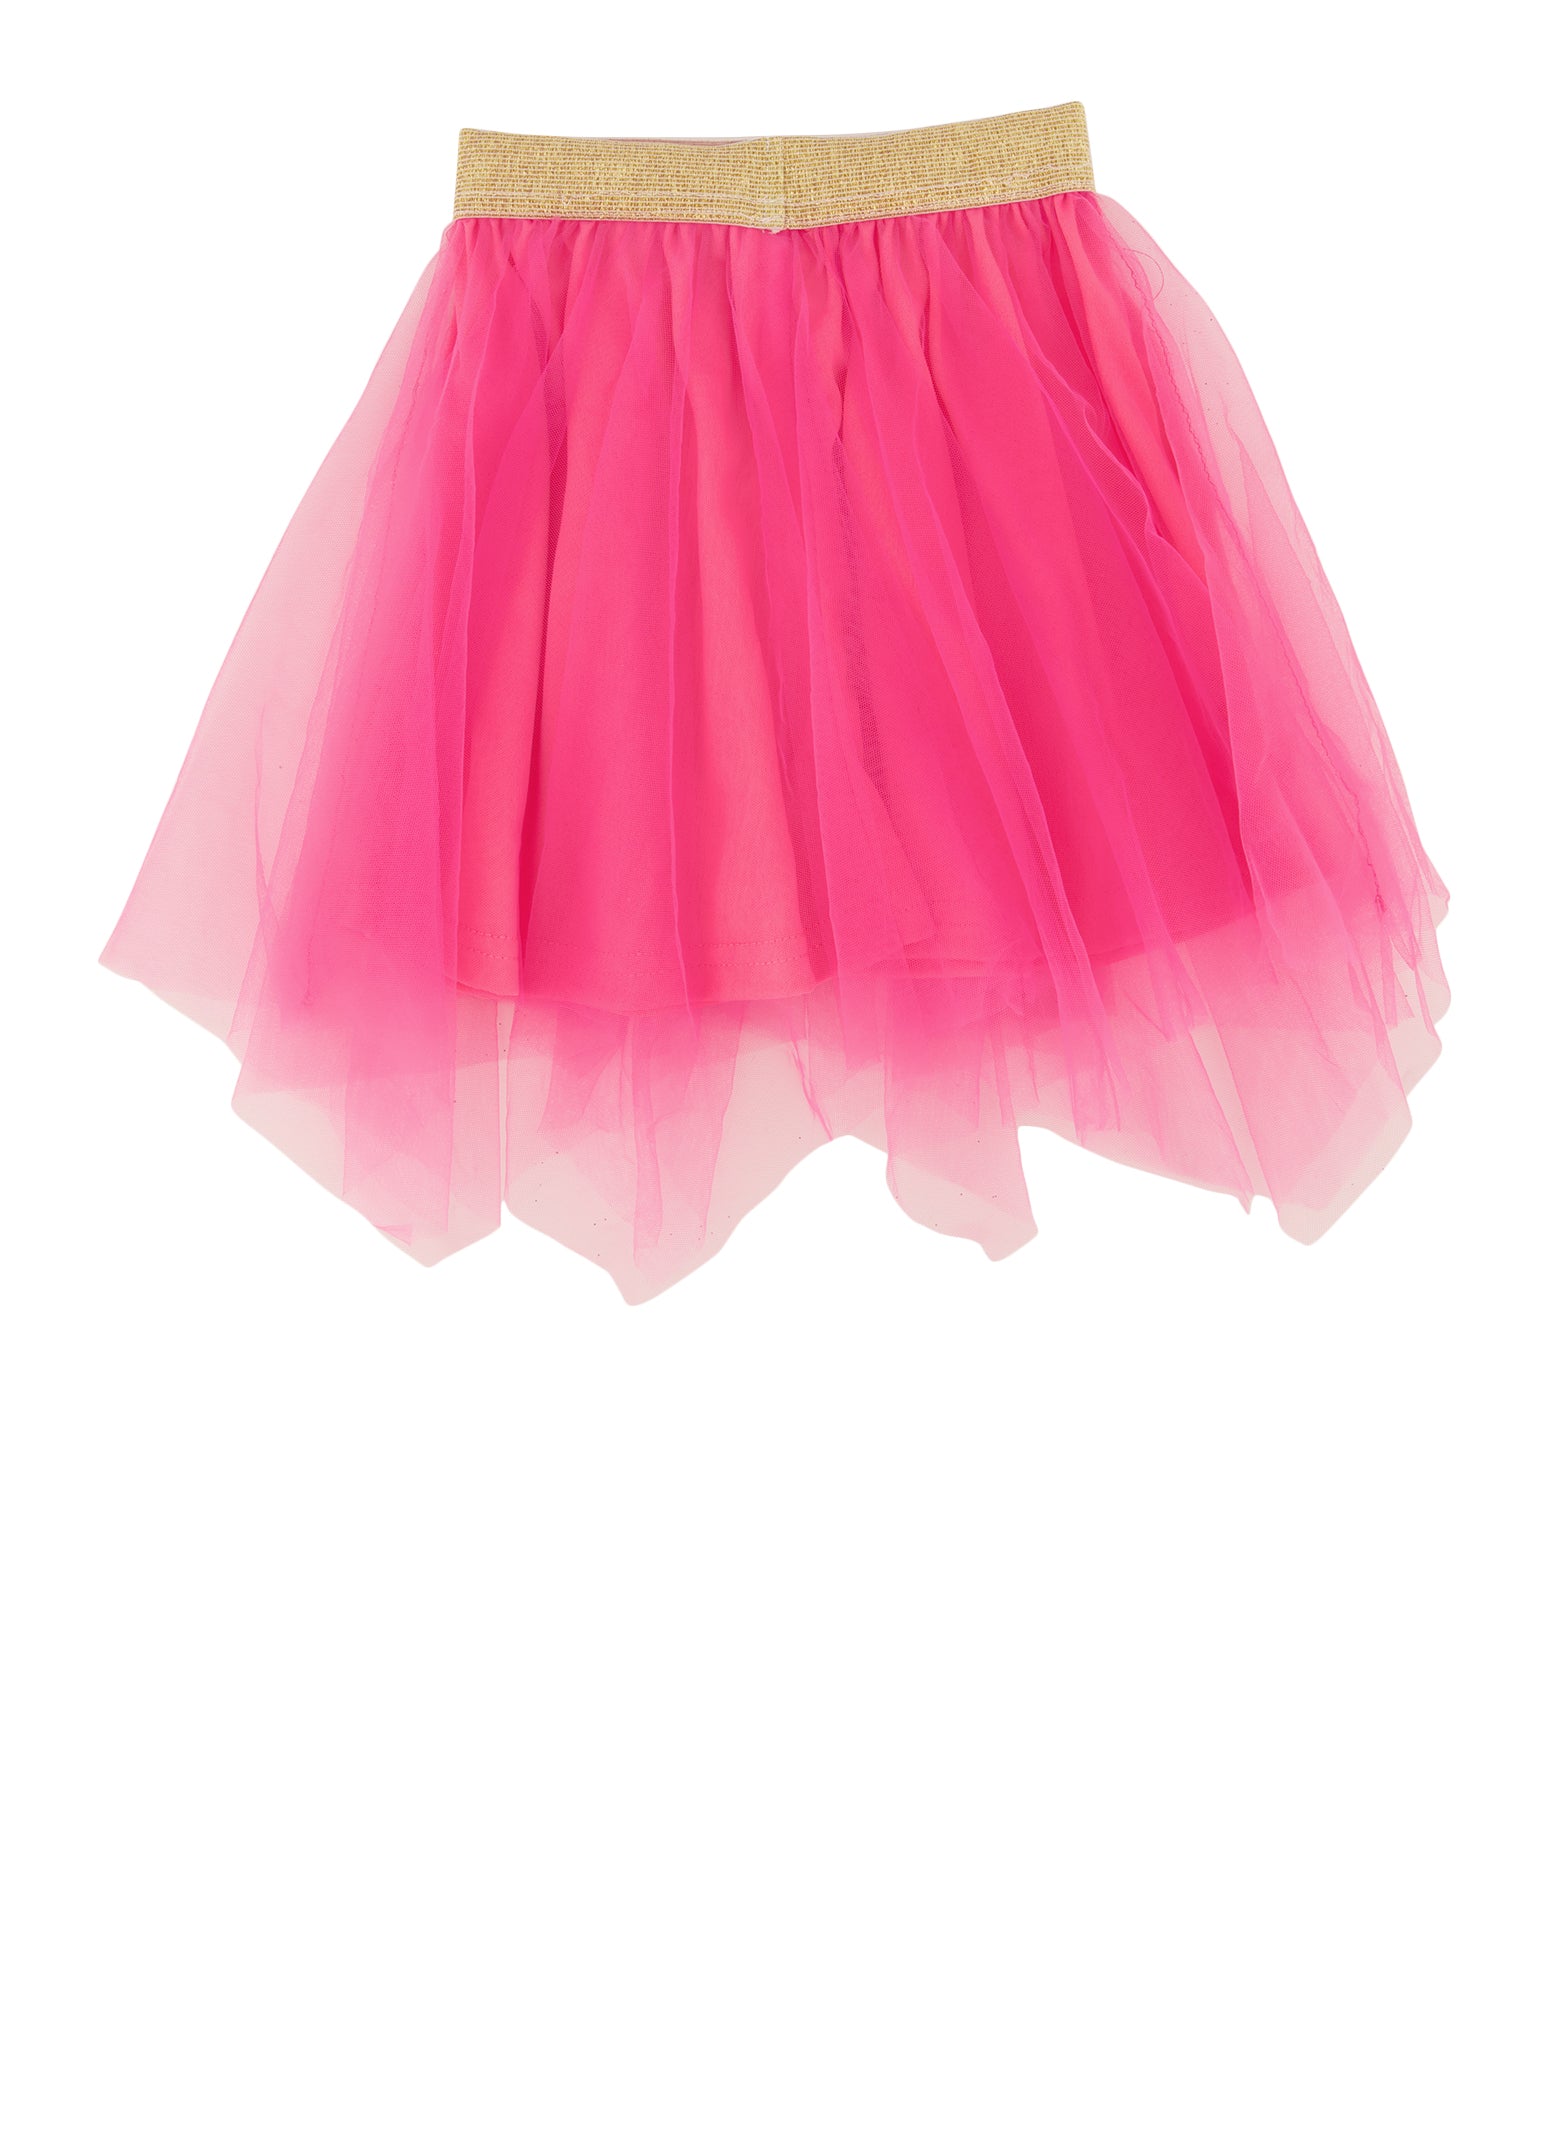 Pink Skirt For Toddler rededuct